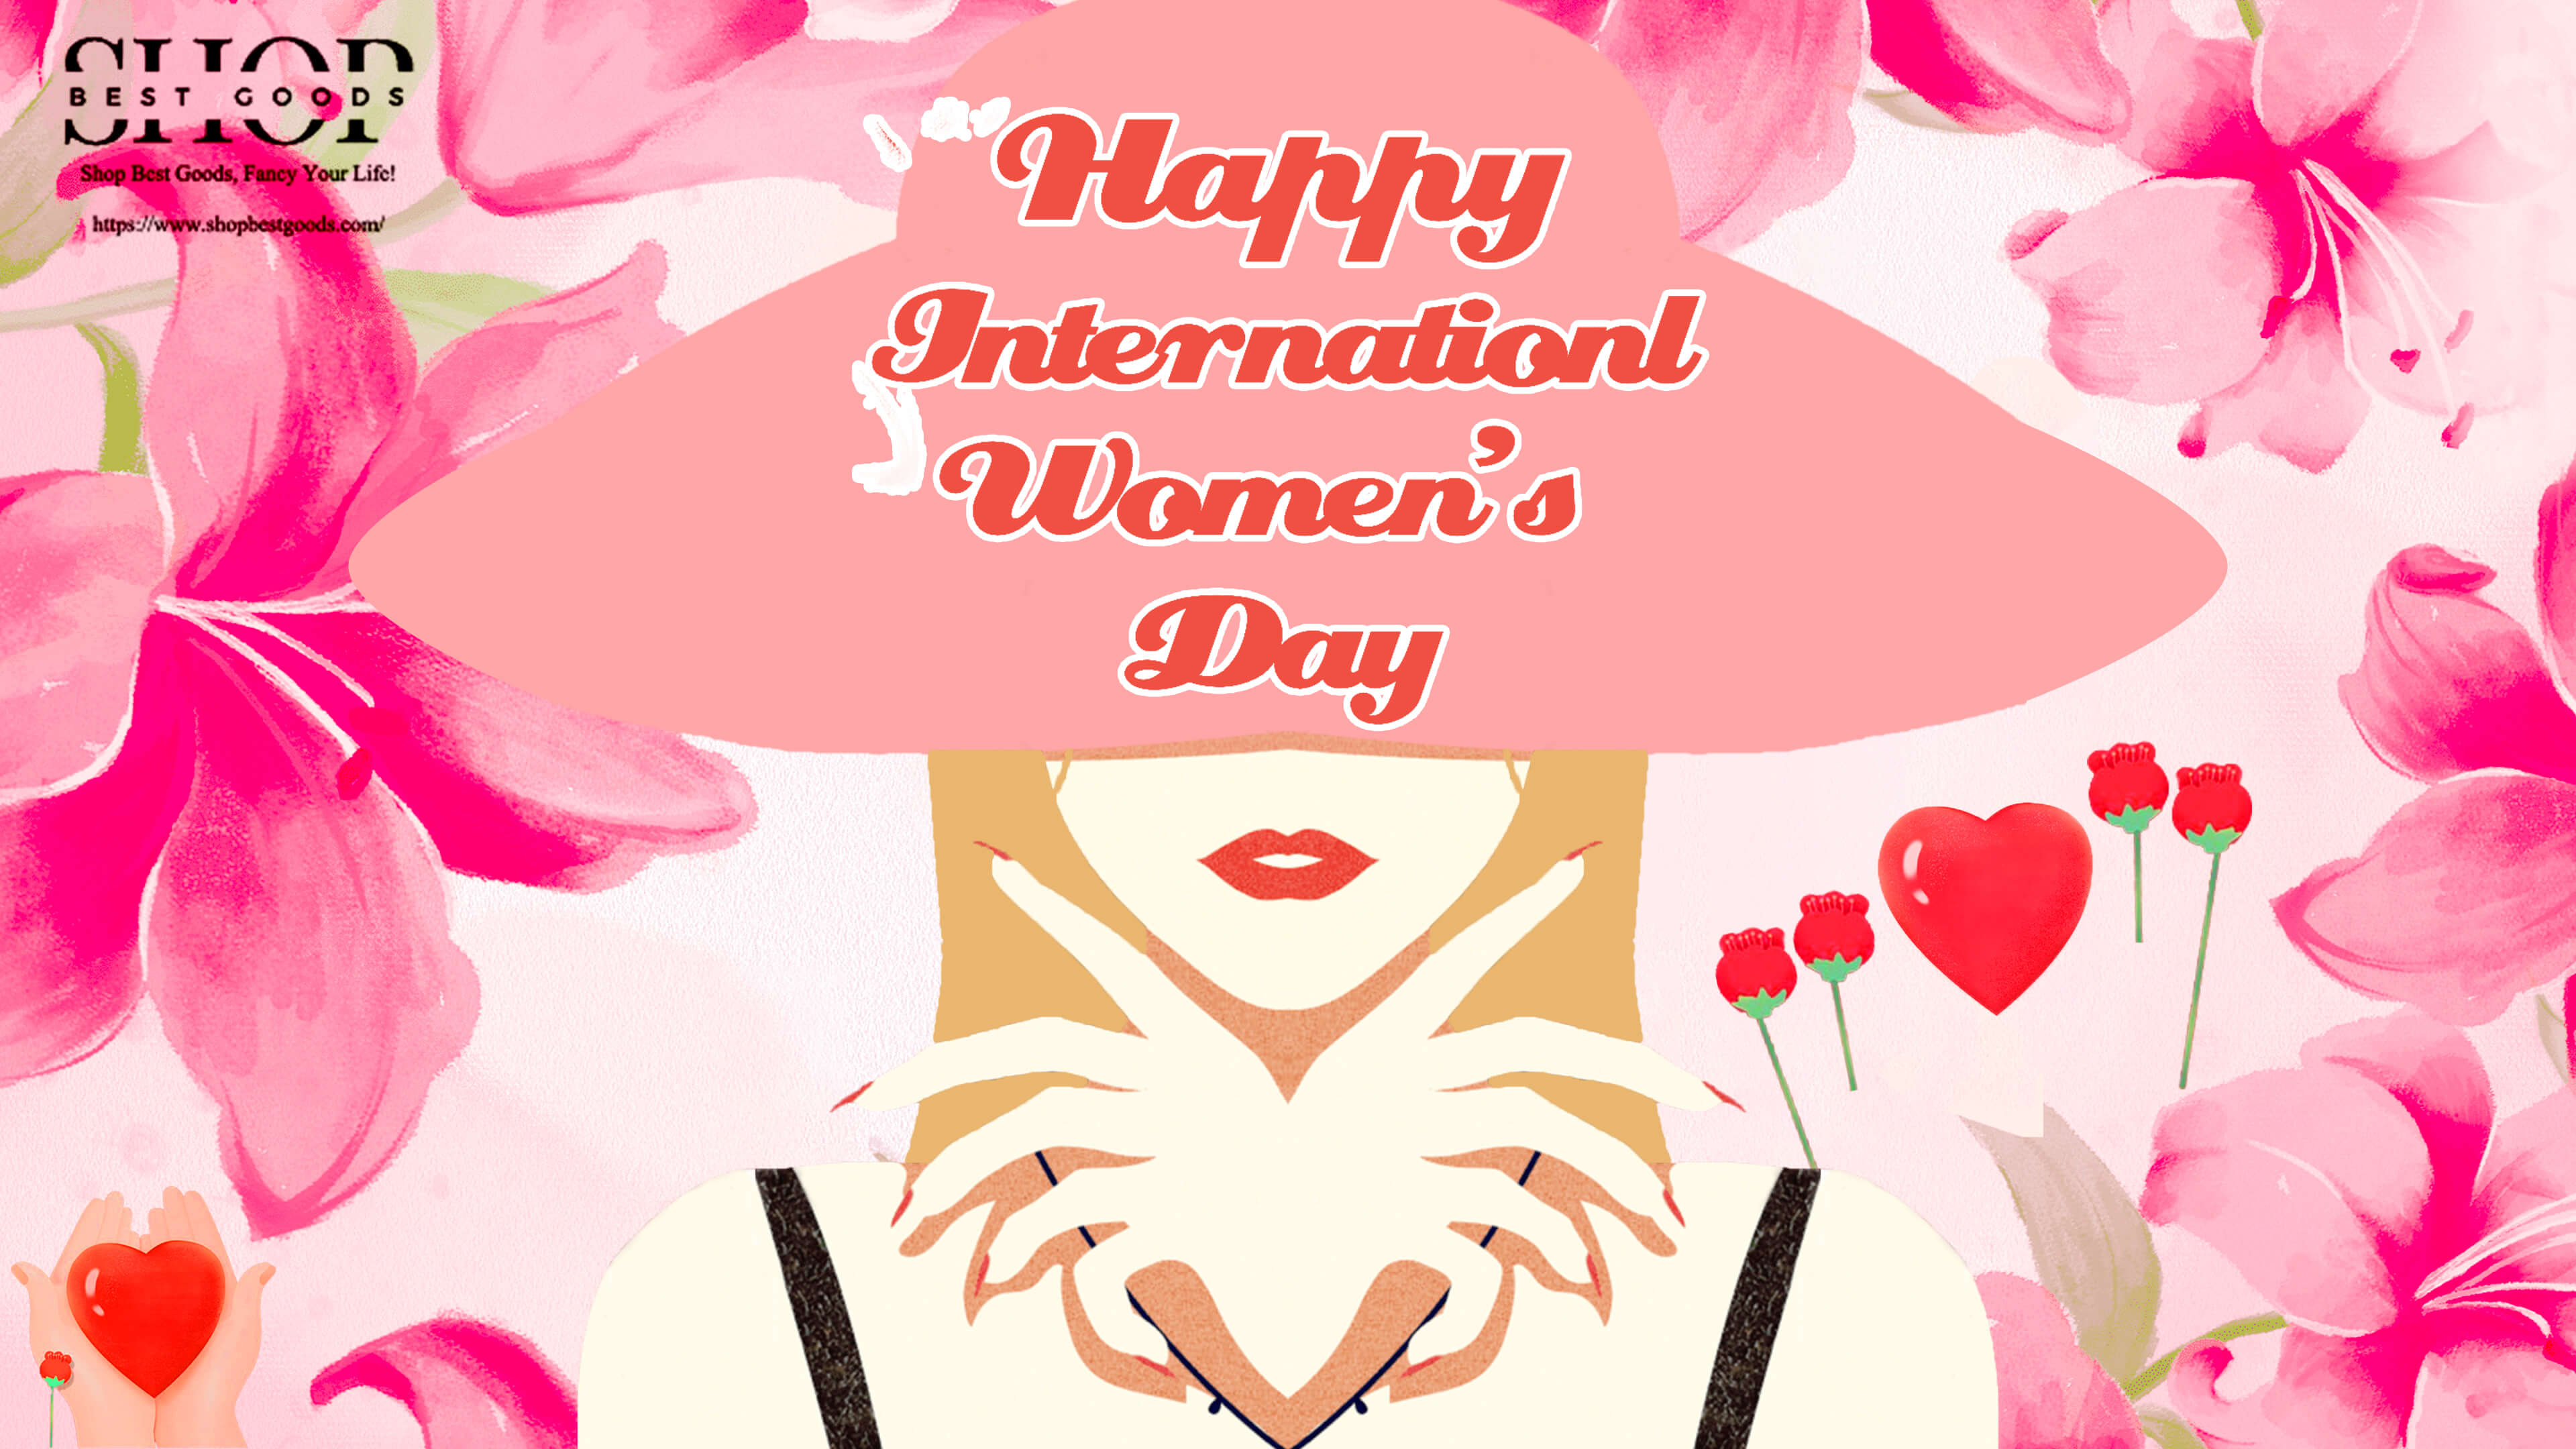 Happy International Women's Day!Picture